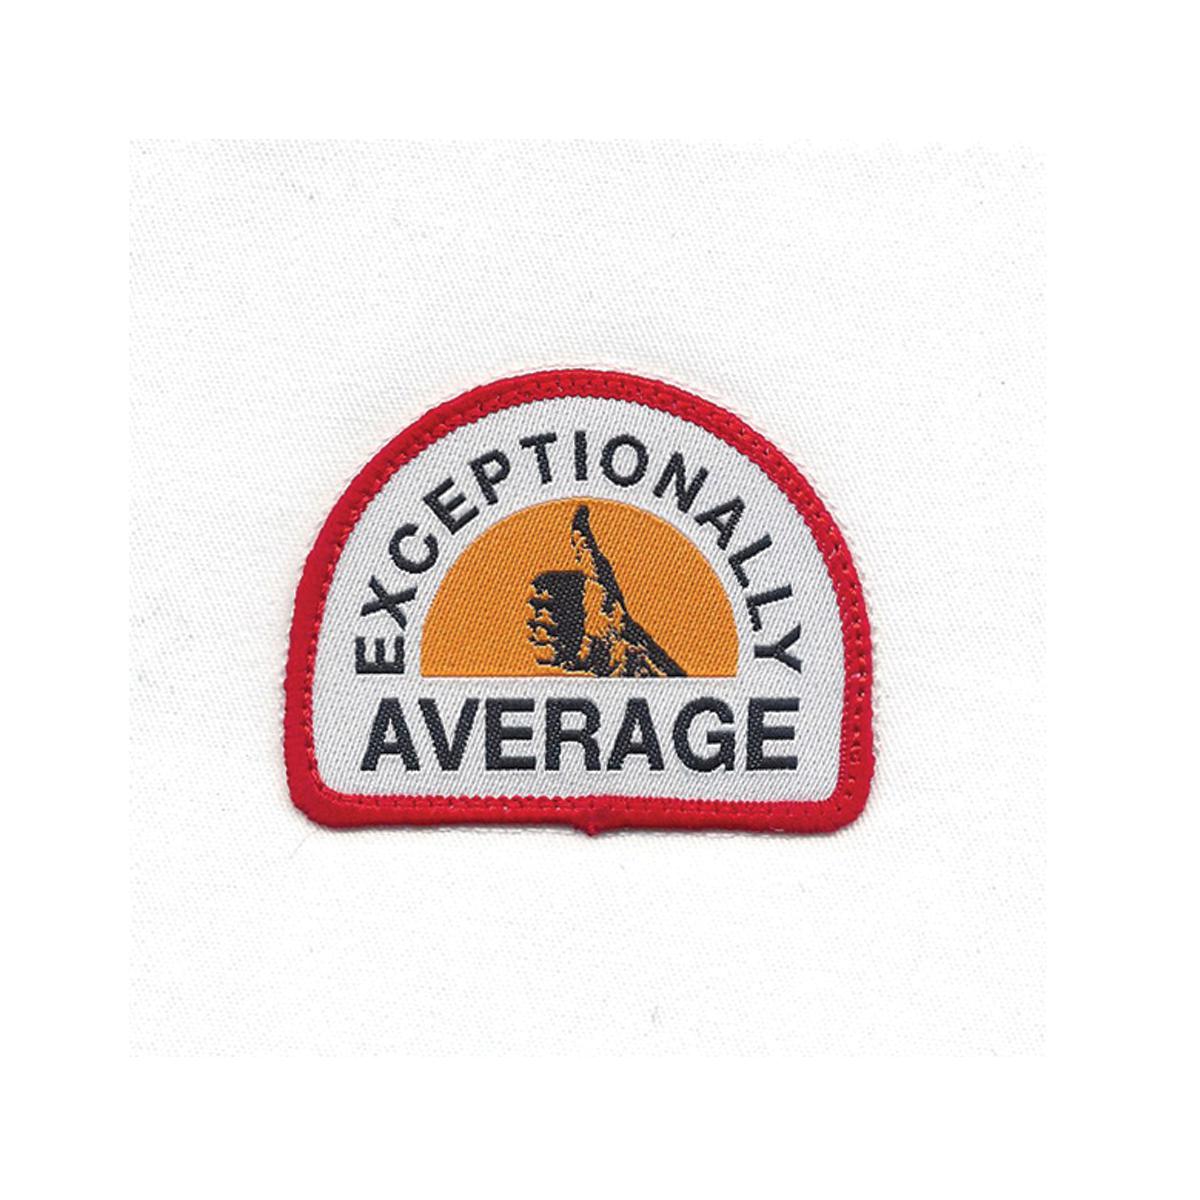 Exceptionally Average Patch Trucker Hat-Hats-PlanBri Uncut-Barstool Sports